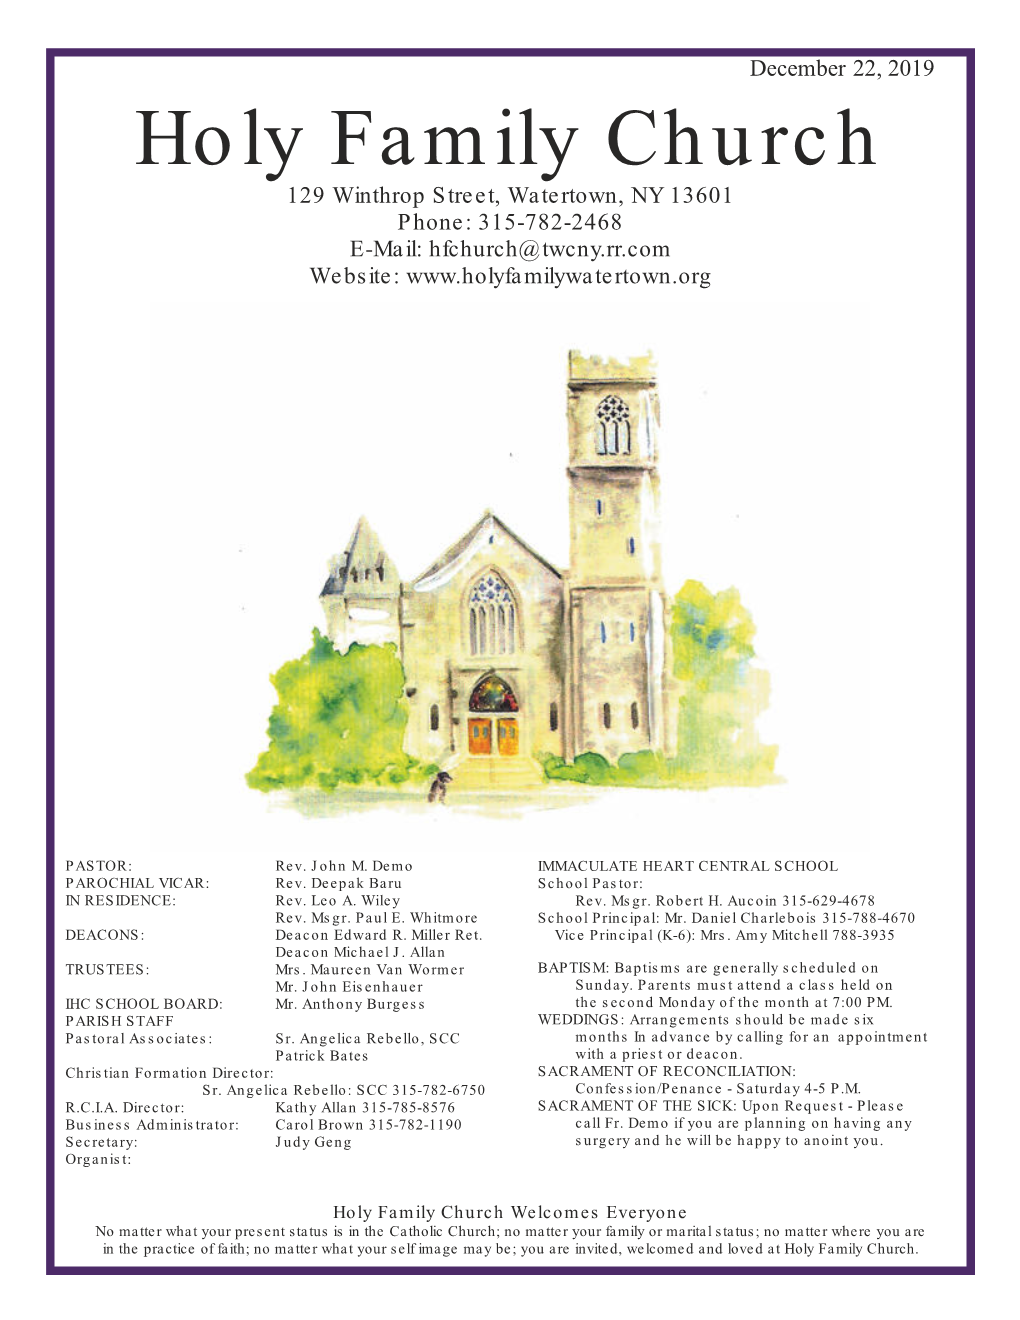 Holy Family Church 129 Winthrop Street, Watertown, NY 13601 Phone: 315-782-2468 E-Mail: Hfchurch@Twcny.Rr.Com Website